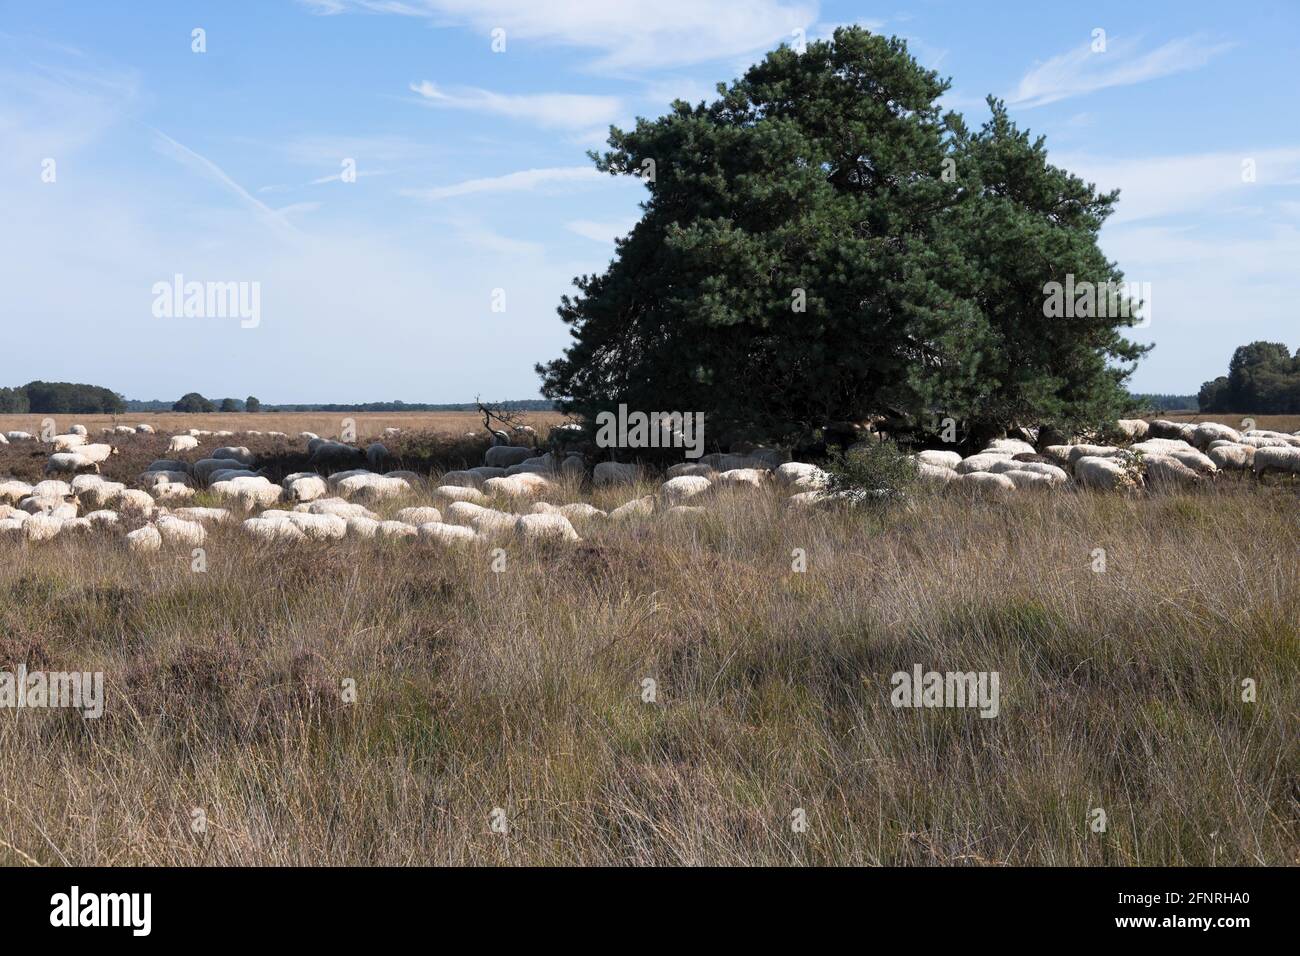 A herd of sheep in a natural heather landscape with trees and Molinia caerulea or moor-grass, near Dwingeloo in the Netherlands Stock Photo